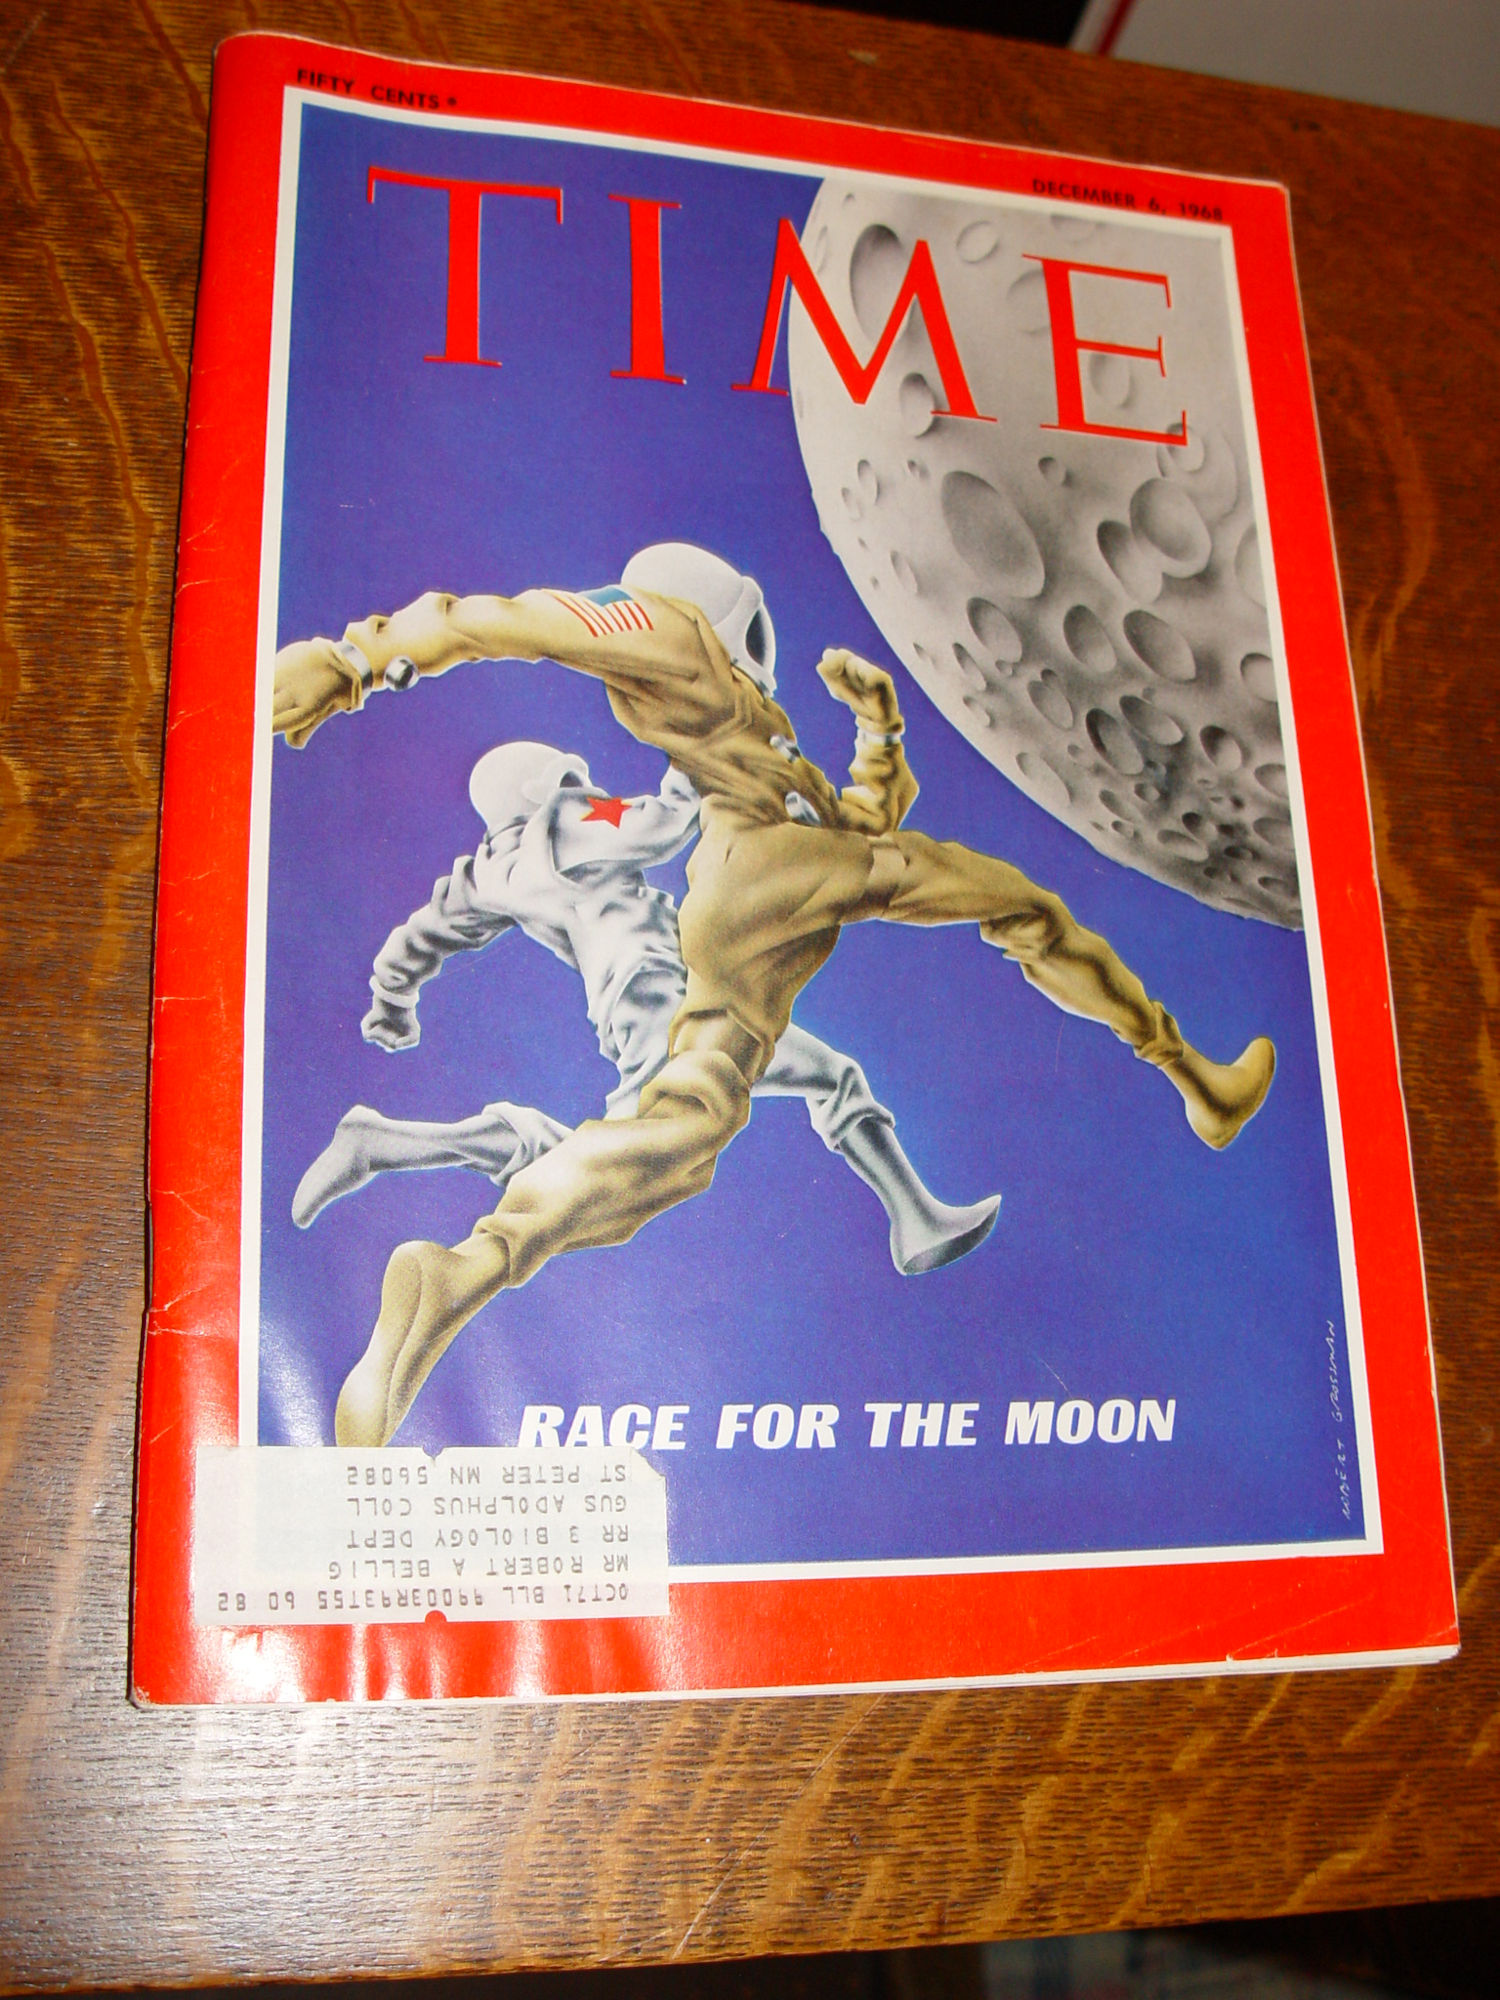 Time Magazine, Dec. 6, 1968, Vol. 92 No. 23
                        Race for the Moon